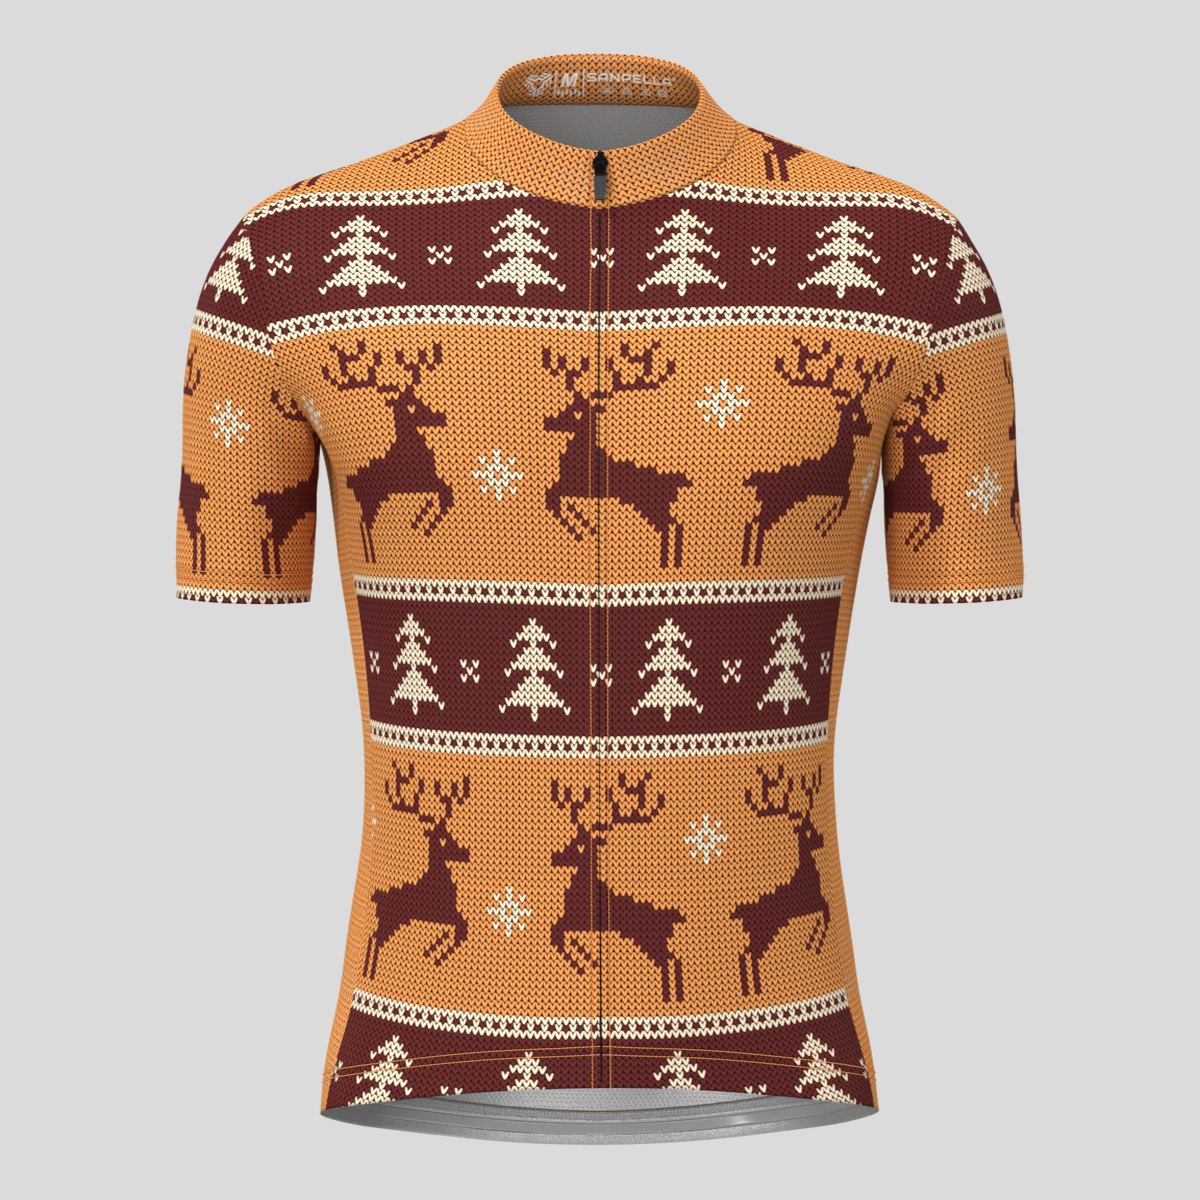 XMAS Ugly Sweater Themed Men's Cycling Jersey - Brown